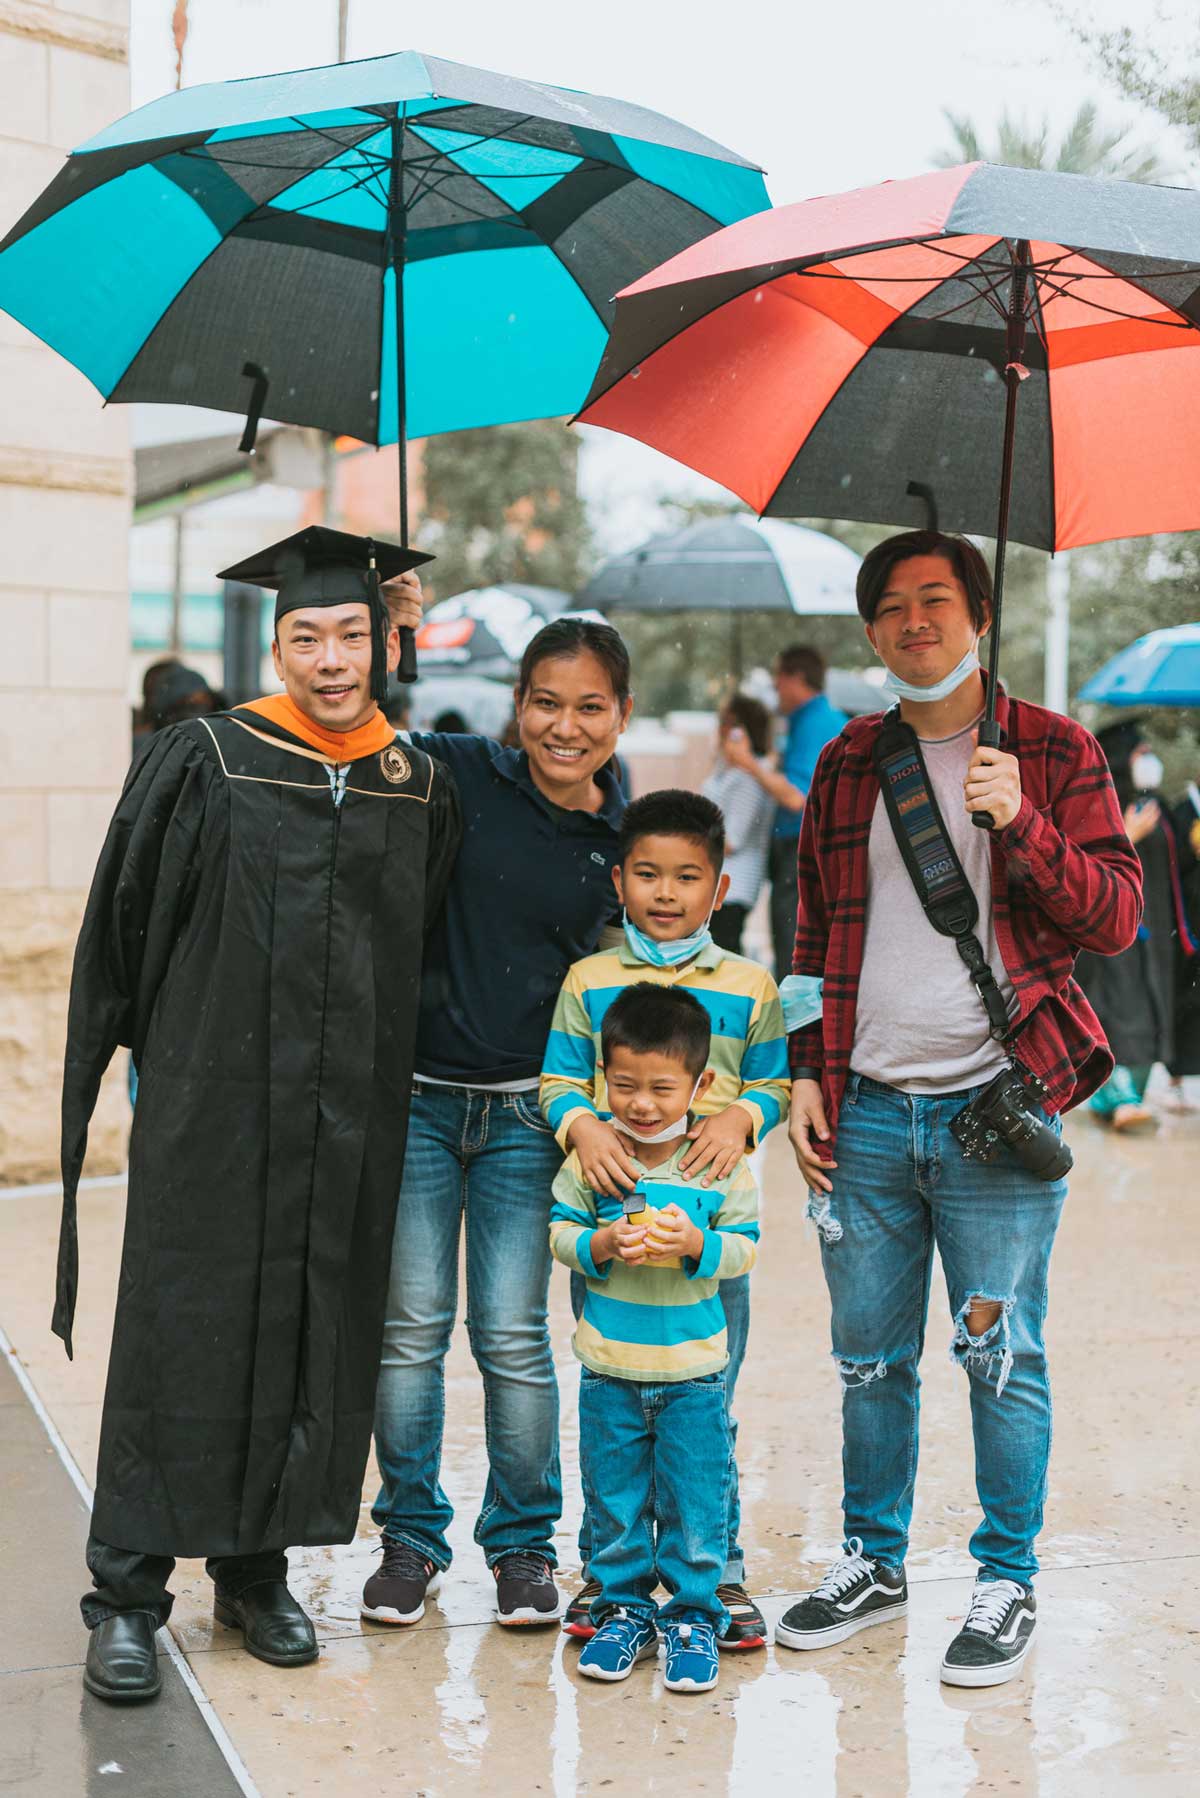 A PhD graduate and his family hold two umbrellas and smile